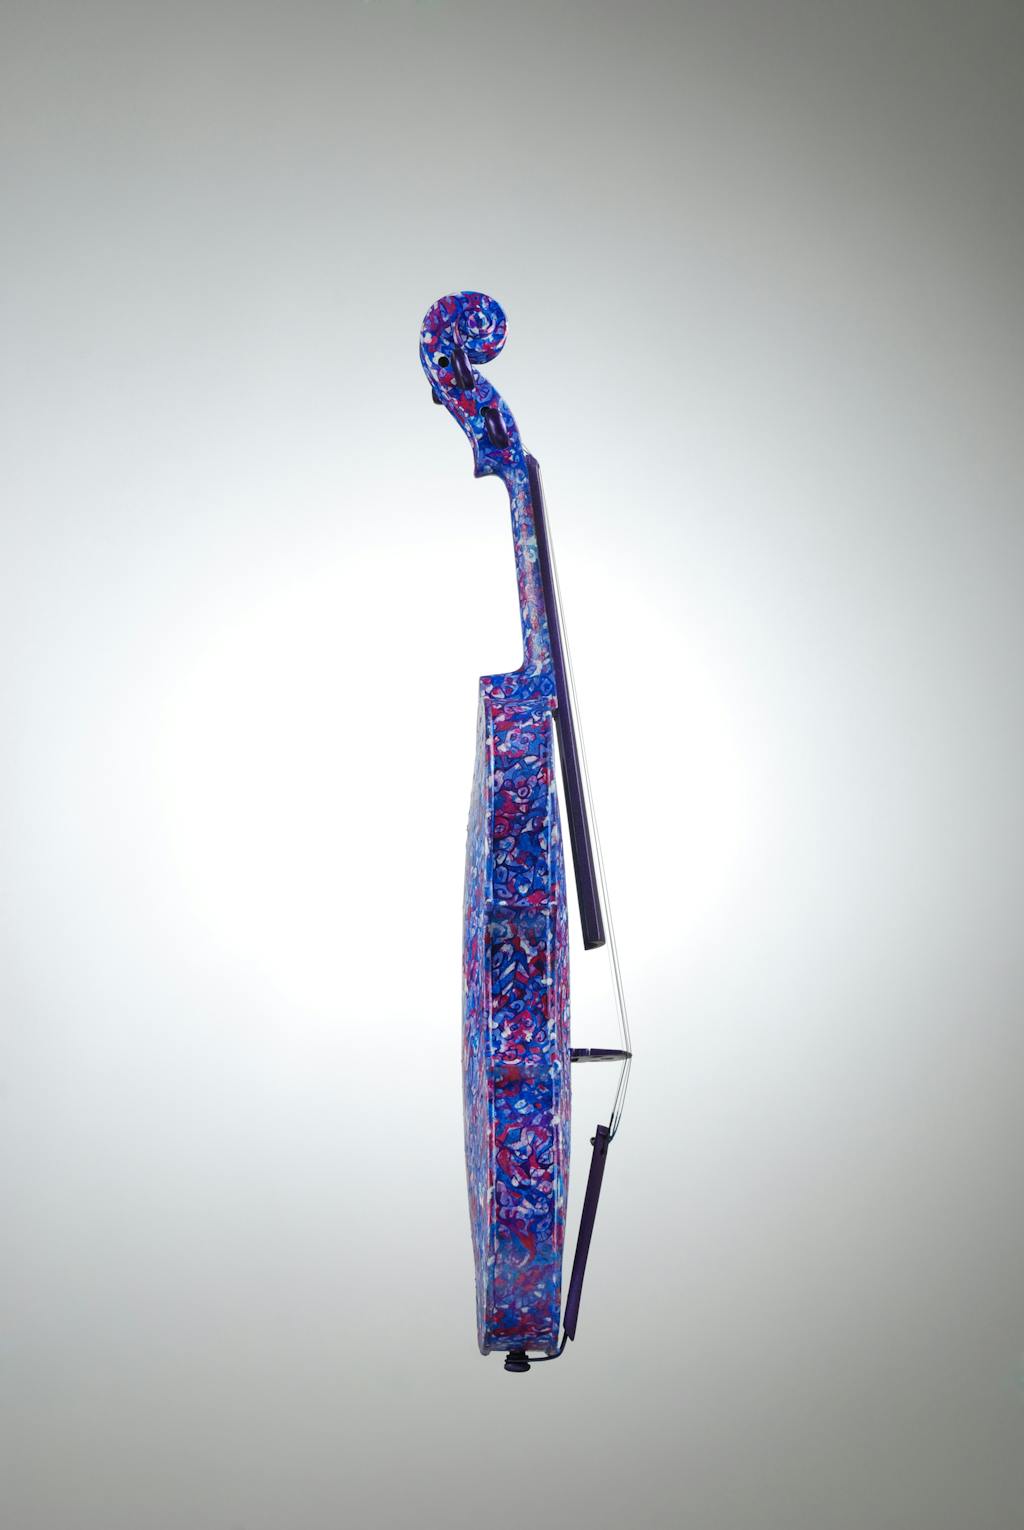 Violin "Lilac", painted by Elena Birkenwald in 2006